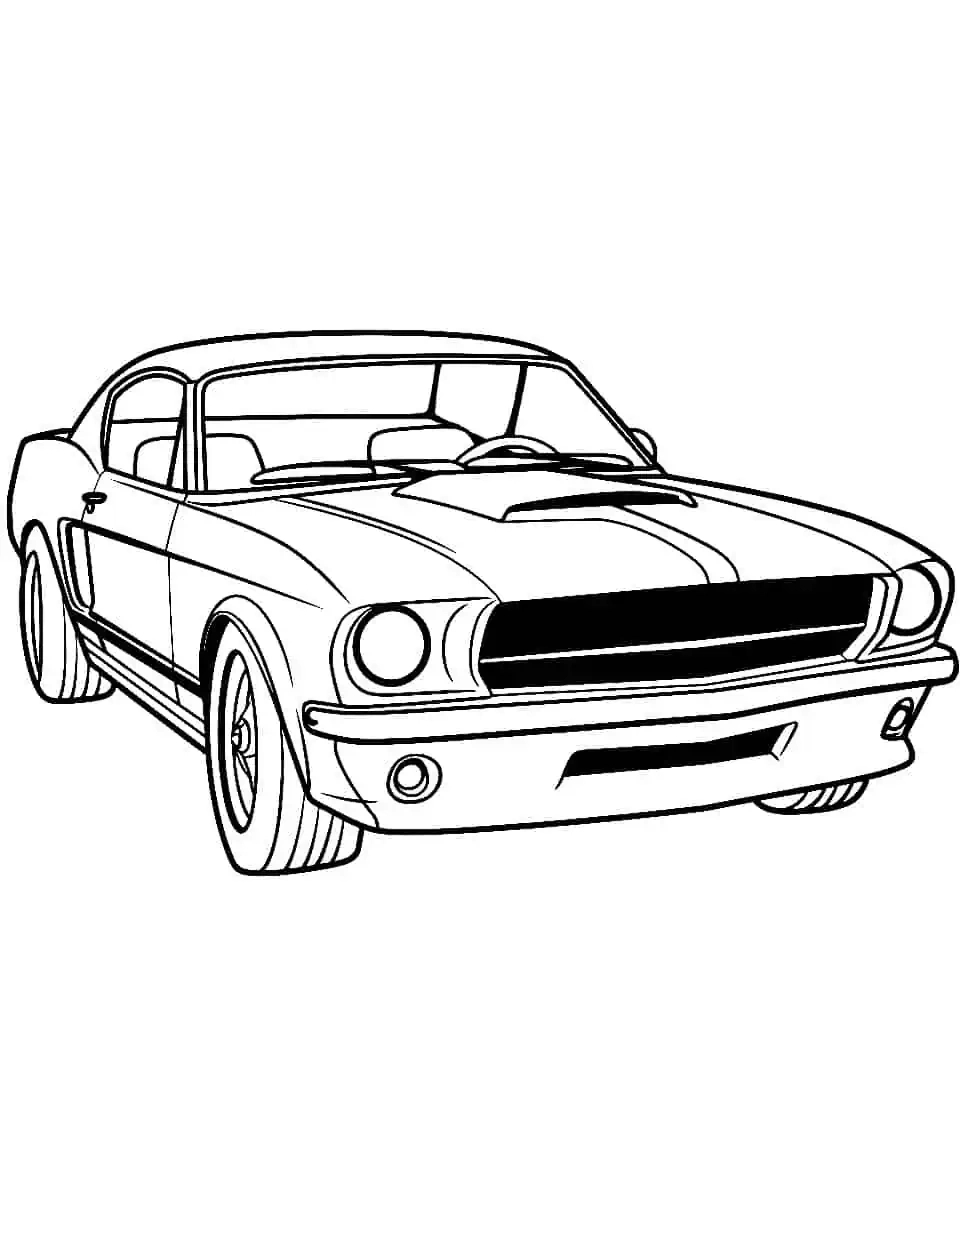 50 Car Coloring Pages: Free Printable Sheets throughout Cars Colouring Pages Printable Free